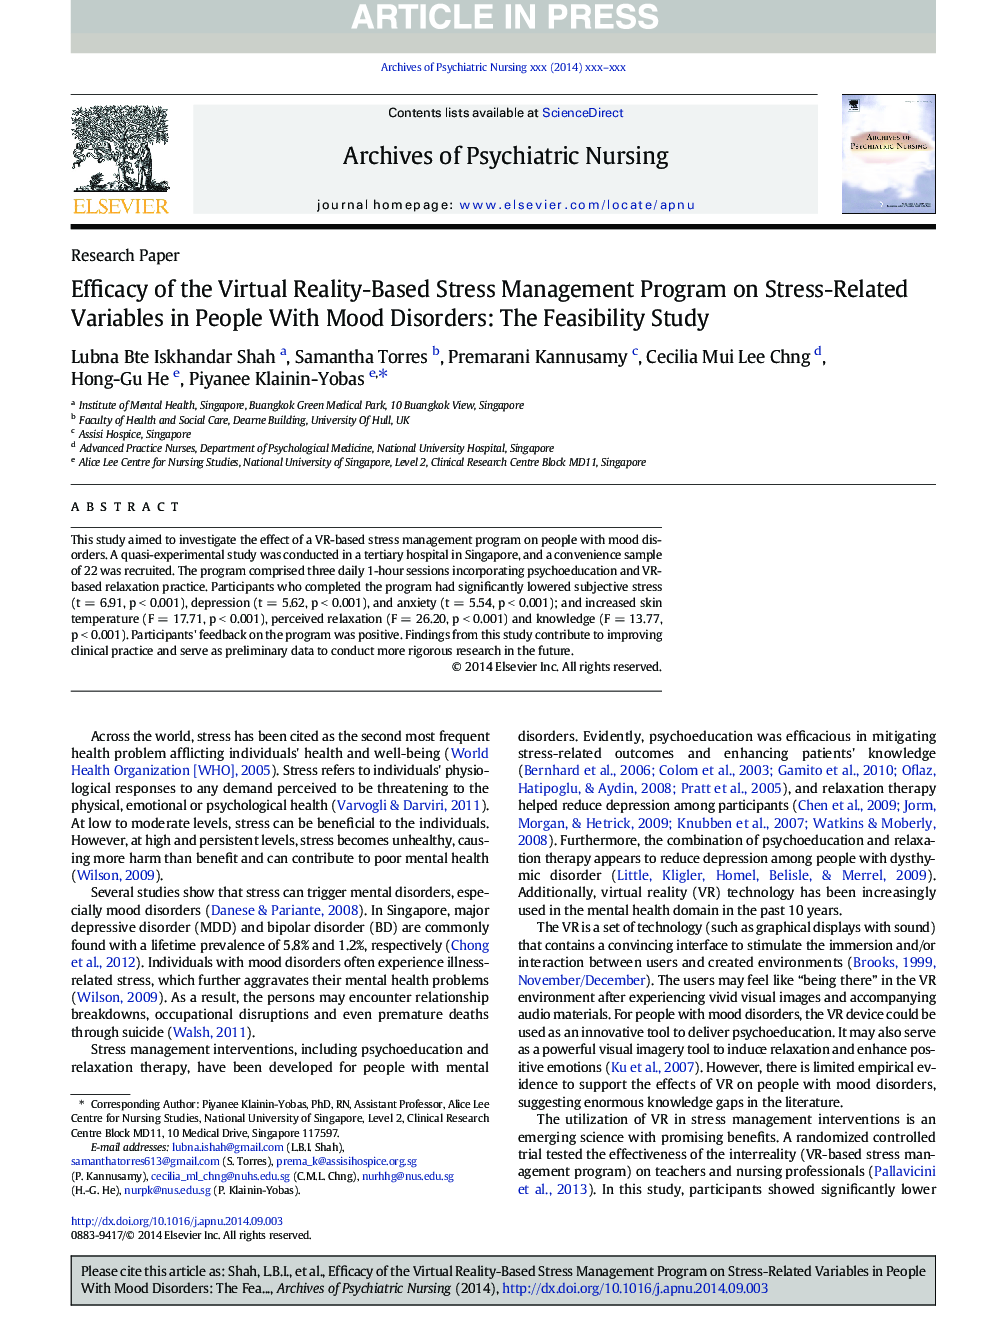 Efficacy of the Virtual Reality-Based Stress Management Program on Stress-Related Variables in People With Mood Disorders: The Feasibility Study